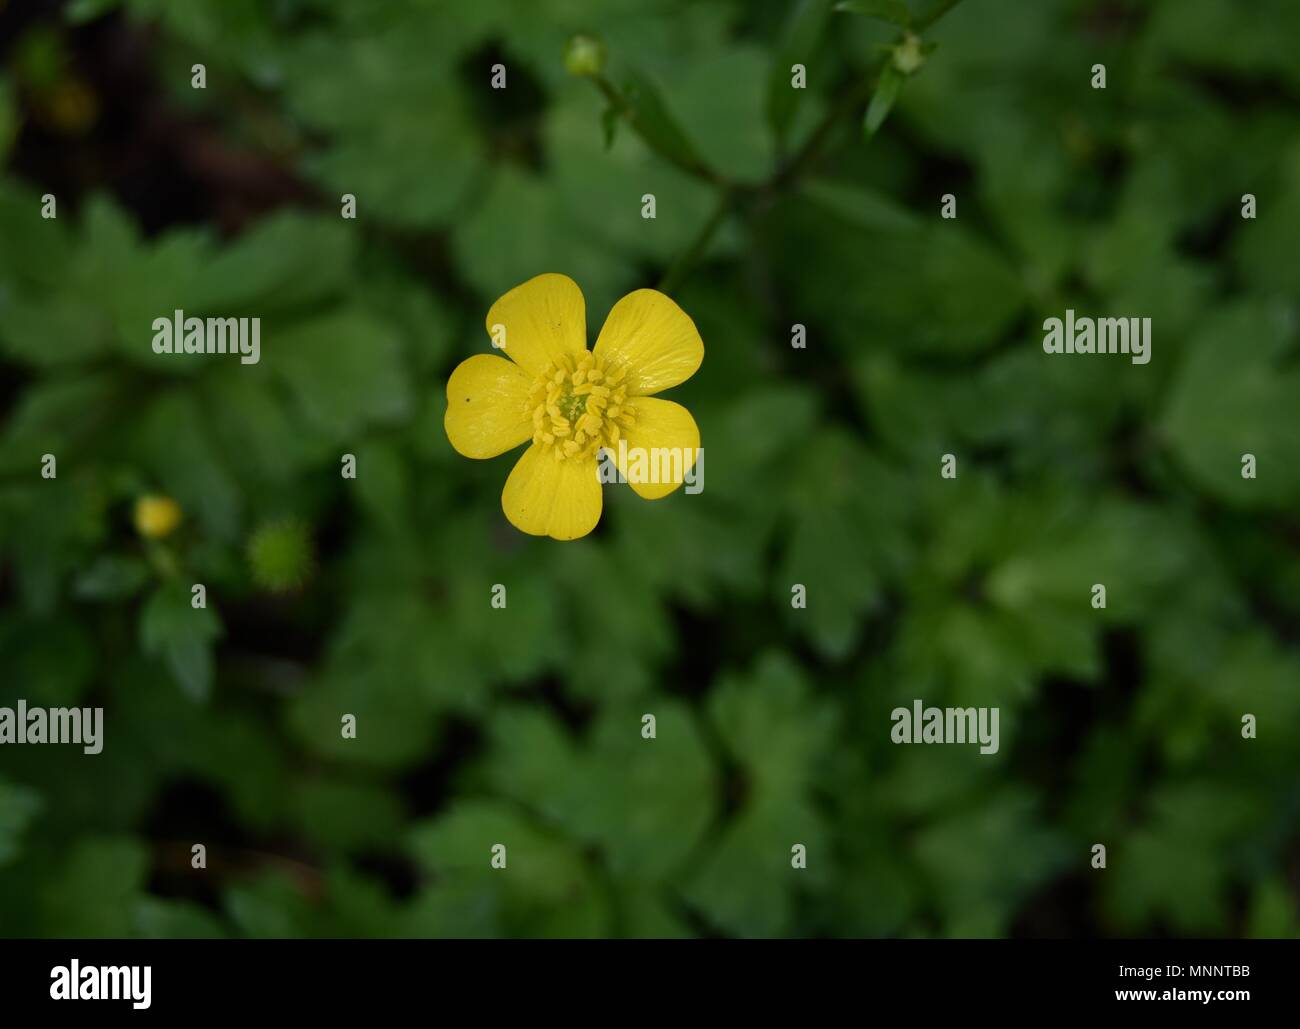 Detail of a bright yellow flower and green leaves of a creeping buttercup plant. Stock Photo